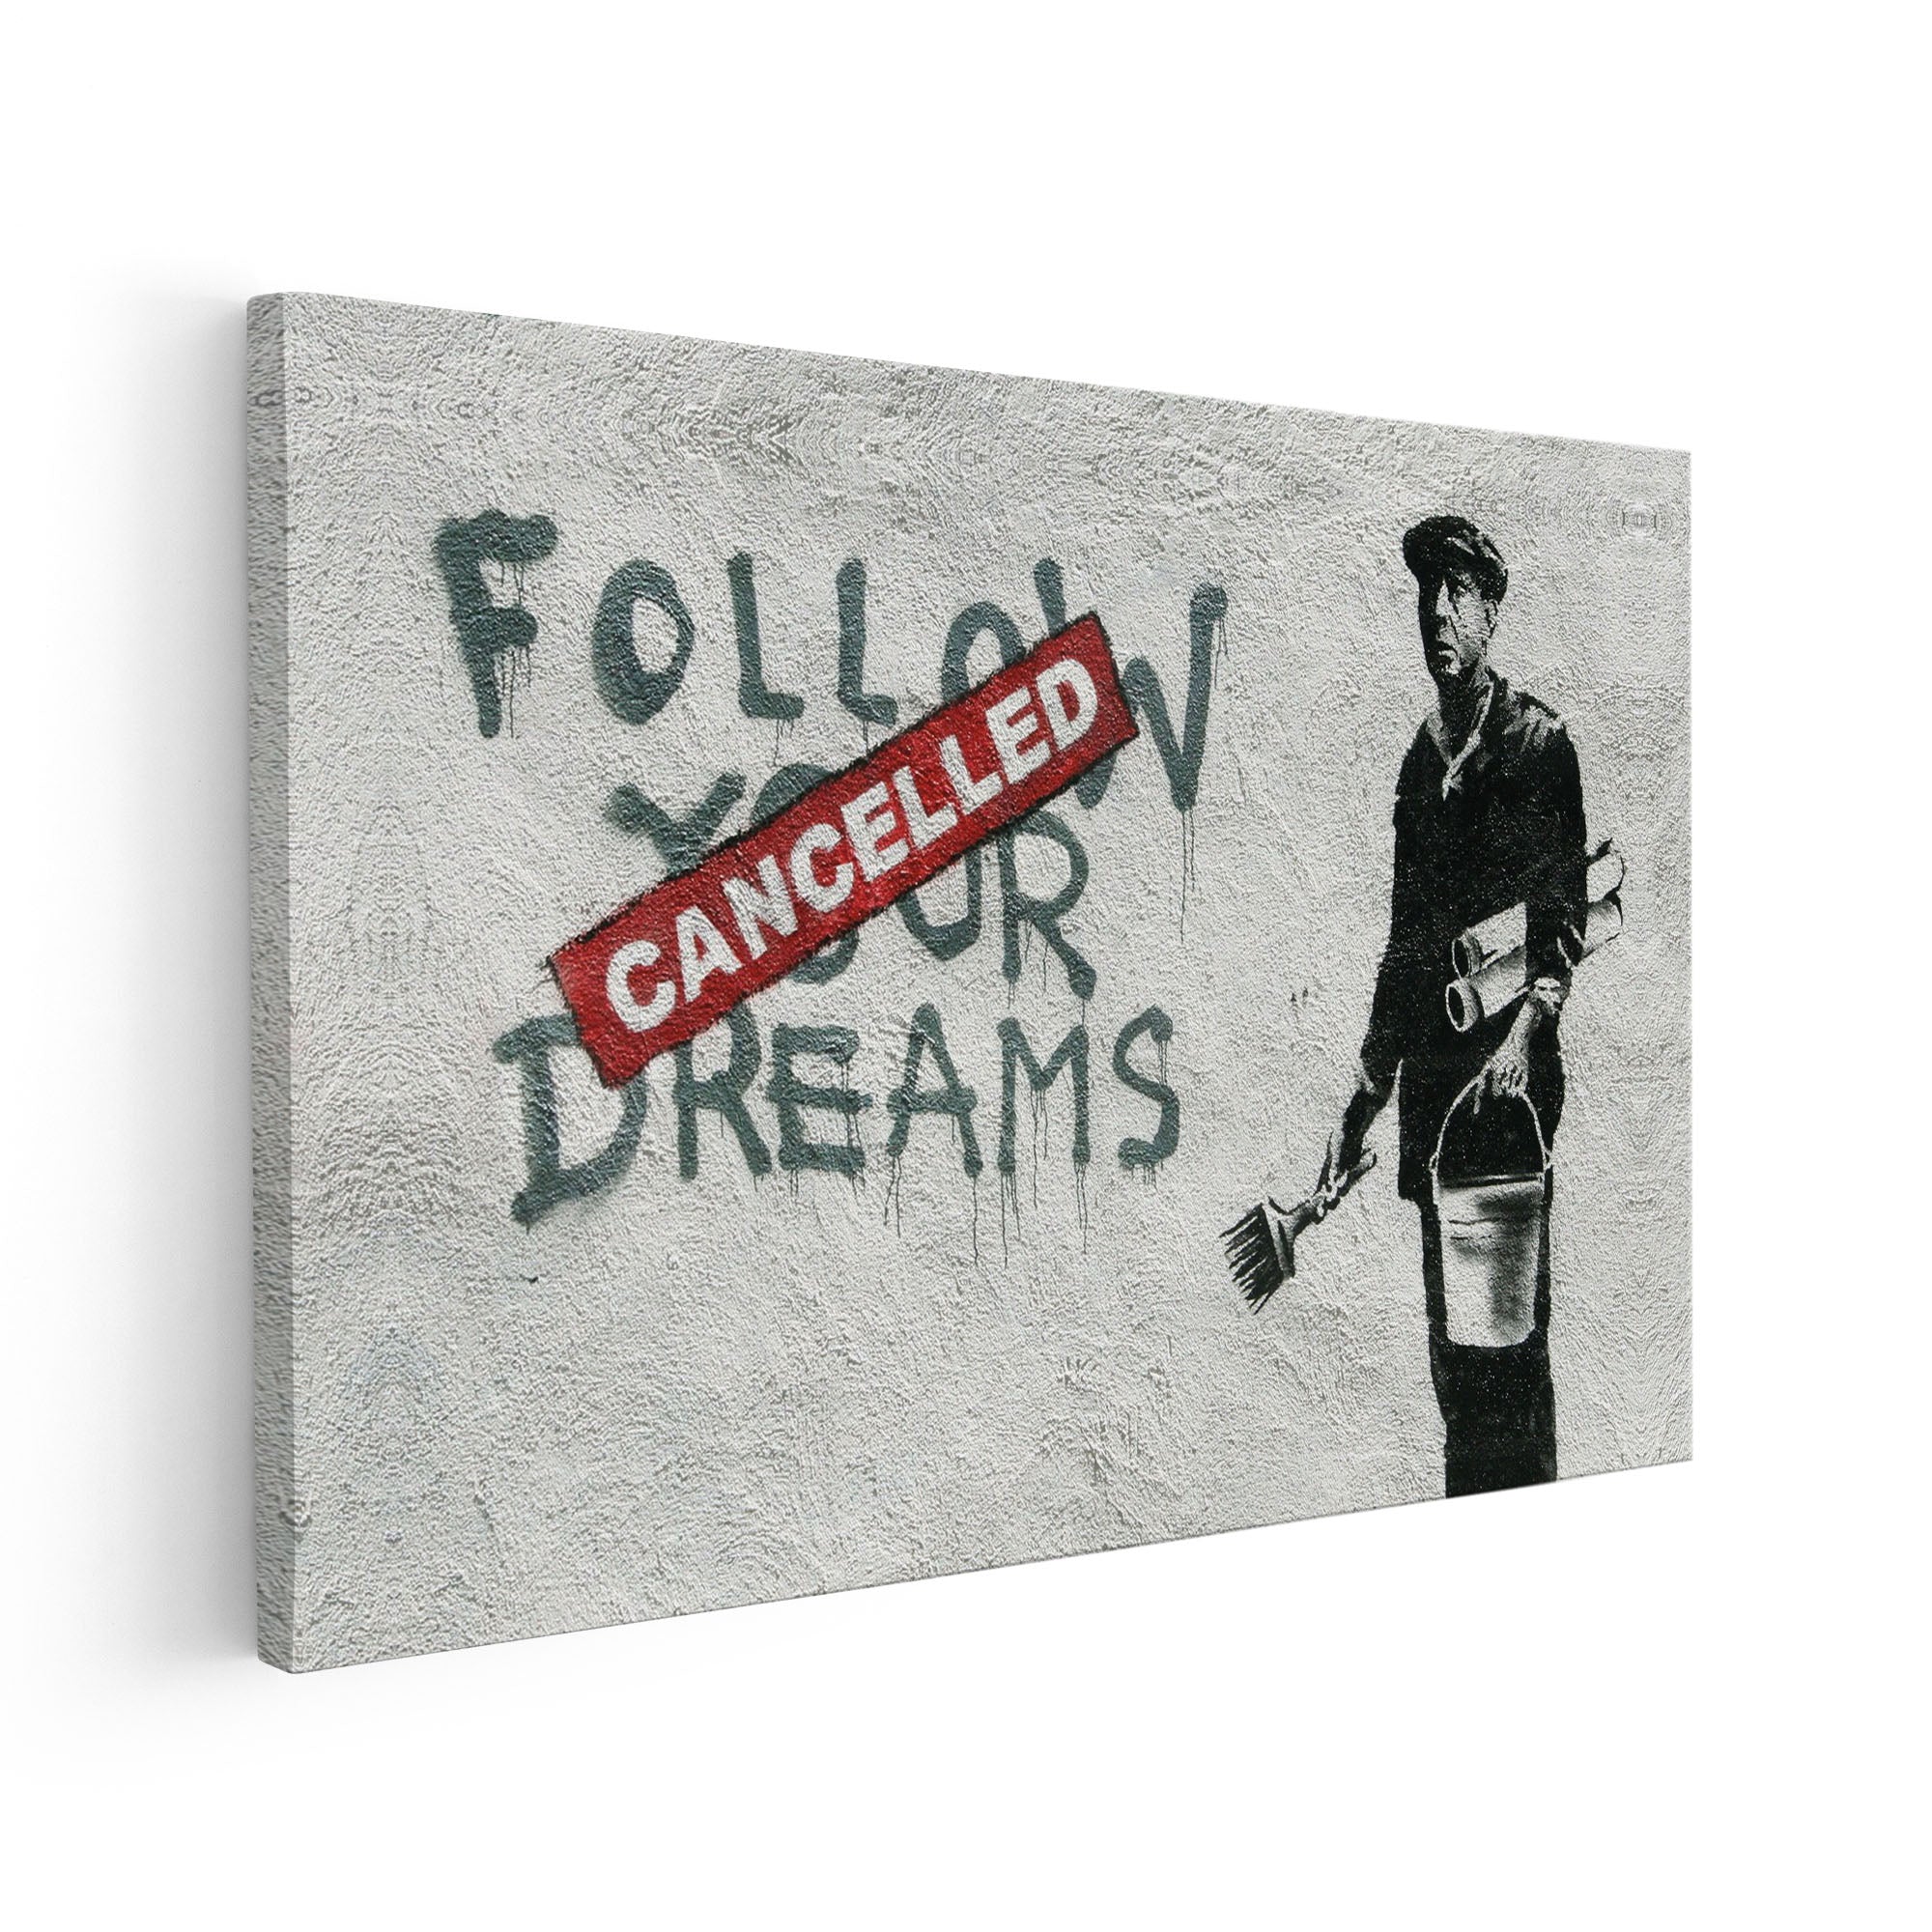 Cancelled Dreams